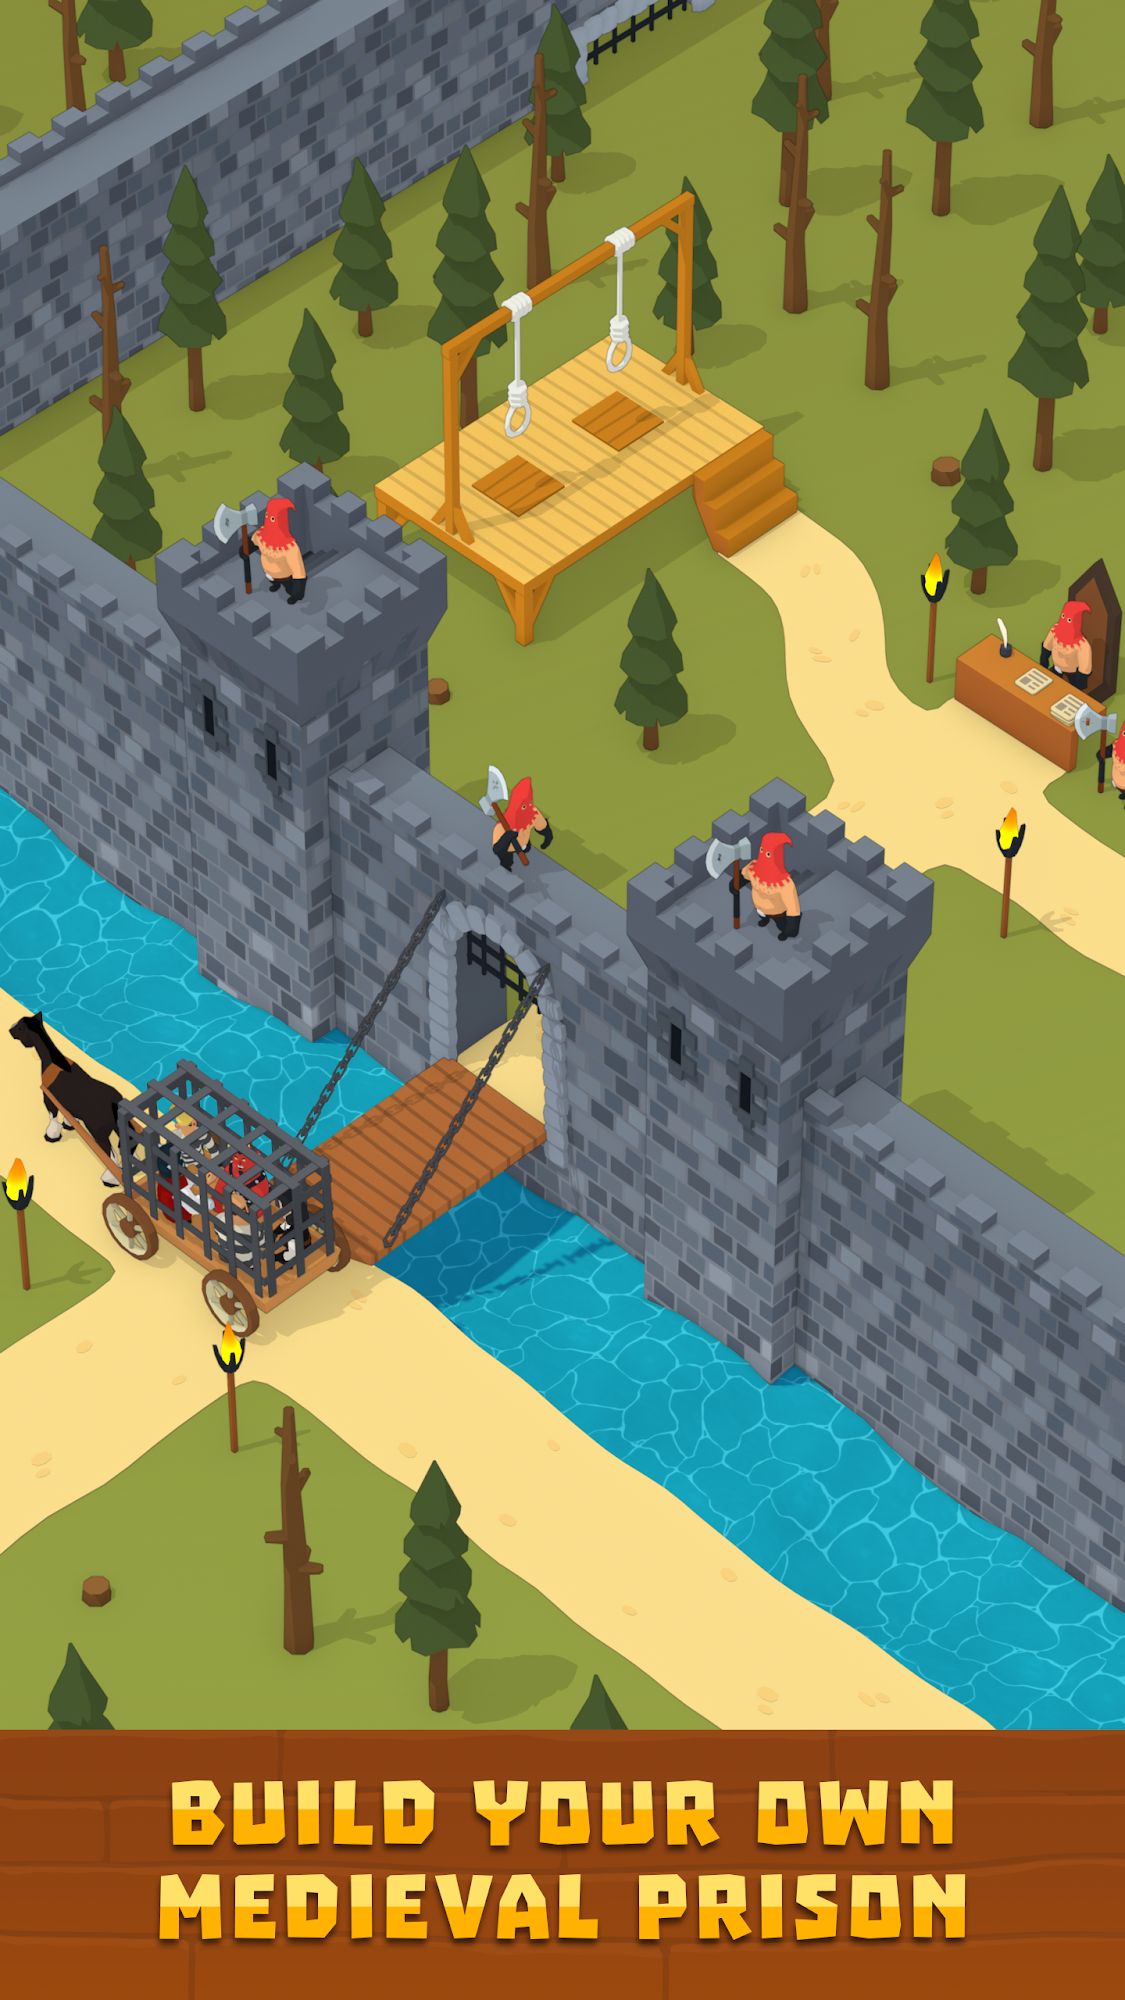 Scarica Idle Medieval Prison Tycoon gratis per Android.